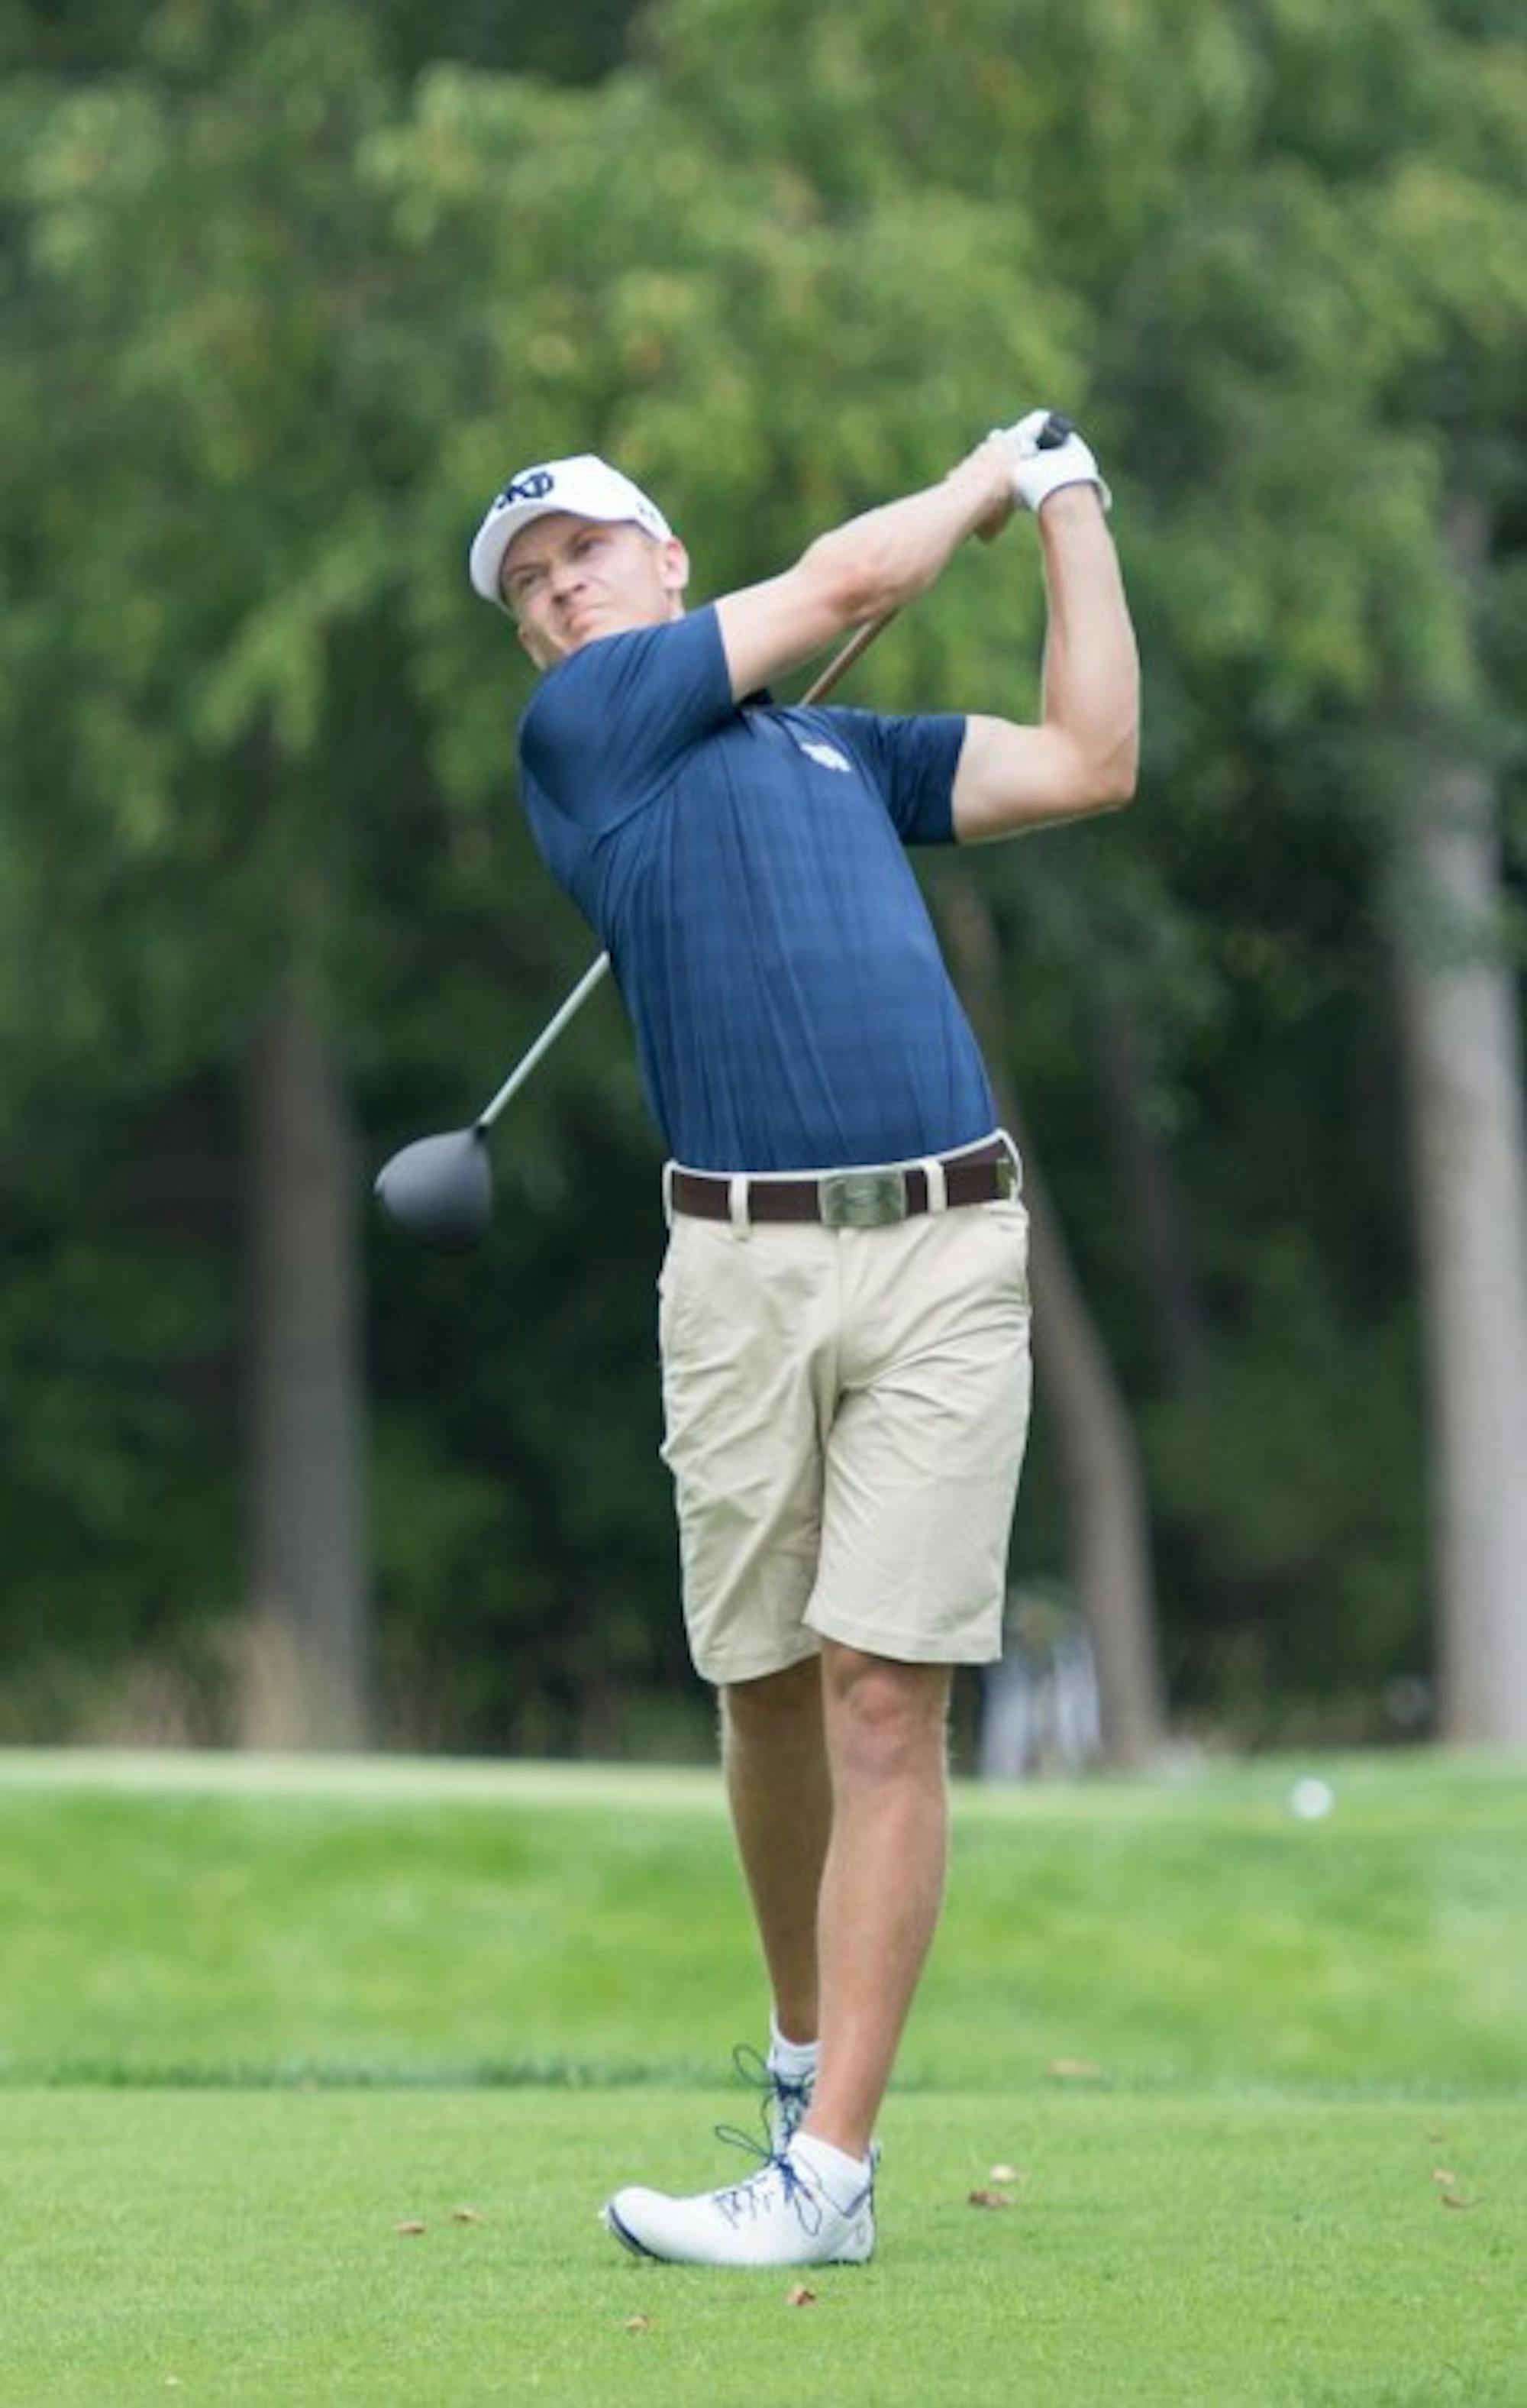 Irish senior David Lowe follows through on a drive during the Notre Dame Kickoff Challenge at the Warren Golf Course on August 31. The team traveled to Minnesota this past weekend for the Gopher Invitational.